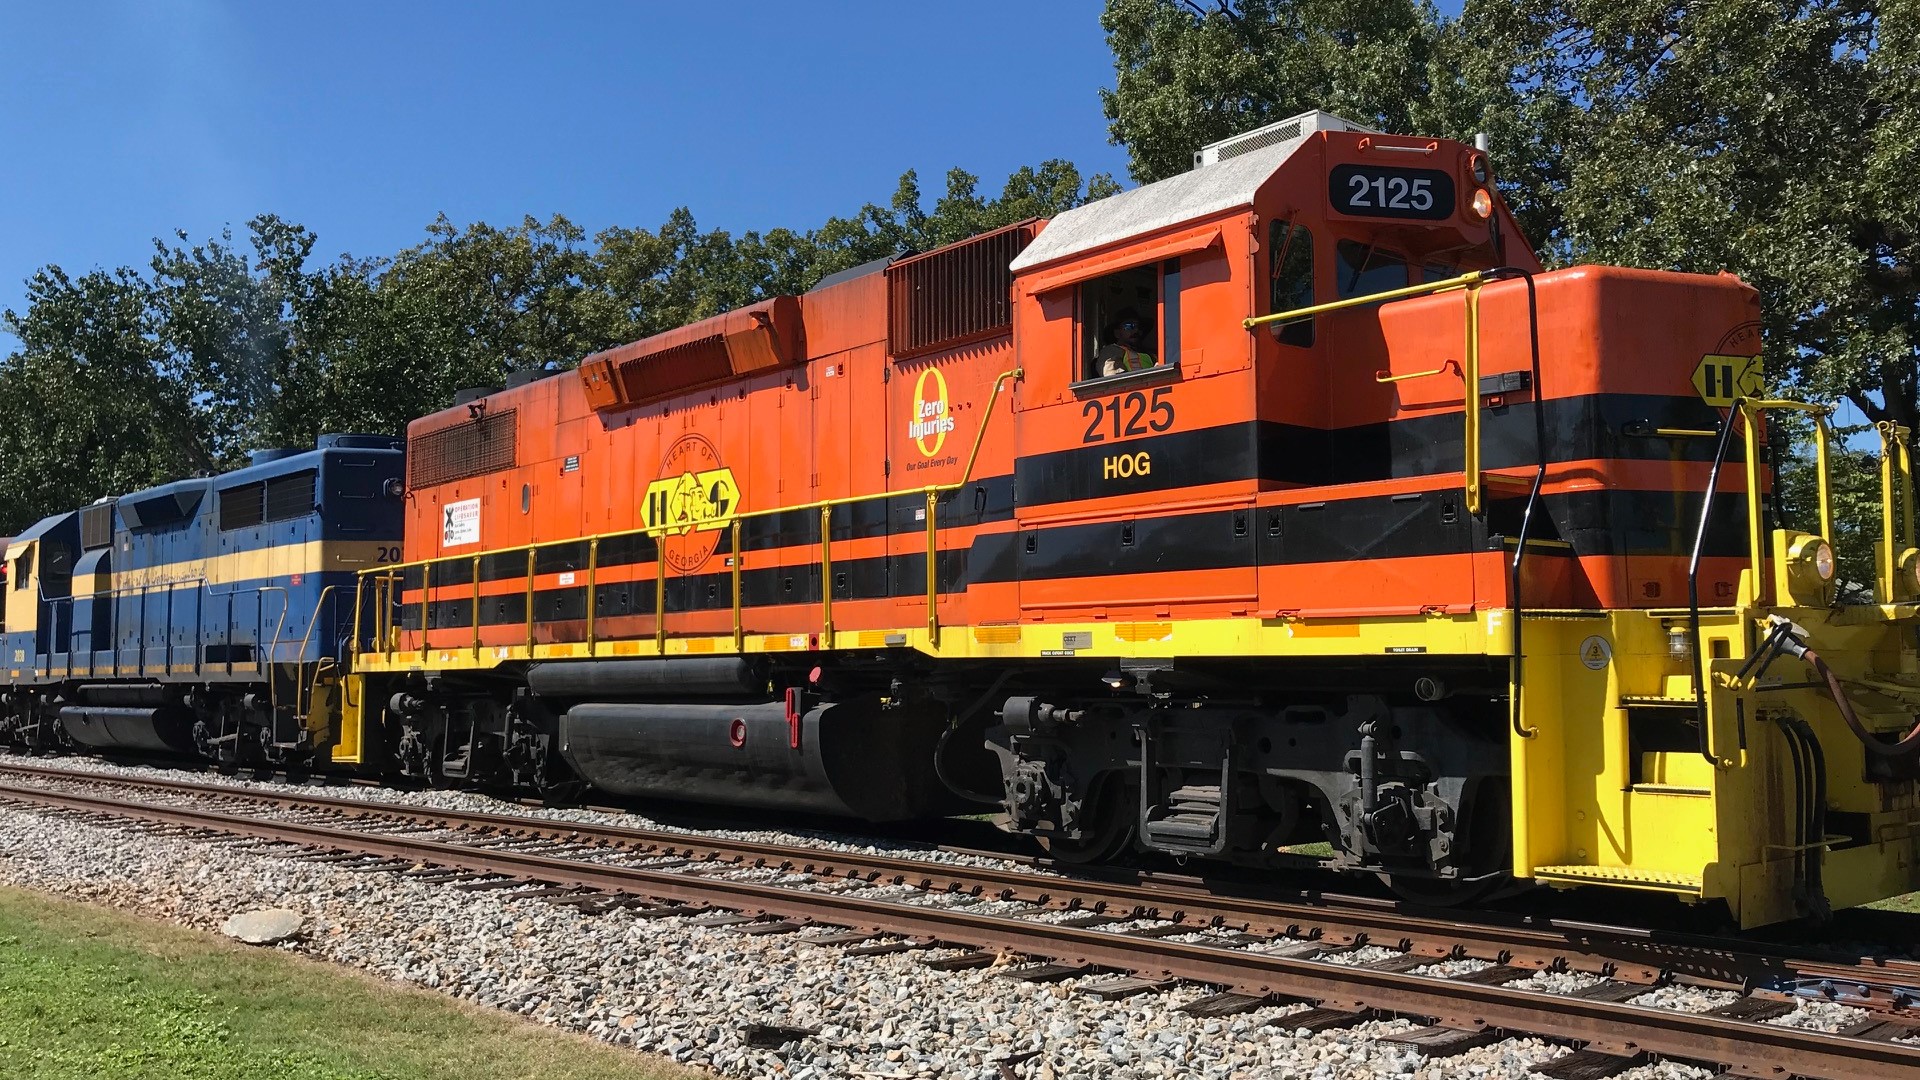 Get a chance to see the Georgia countryside and climbing aboard the Sam Shortline in Cordele for a full day trip or start in Americus for a shorter excursion.